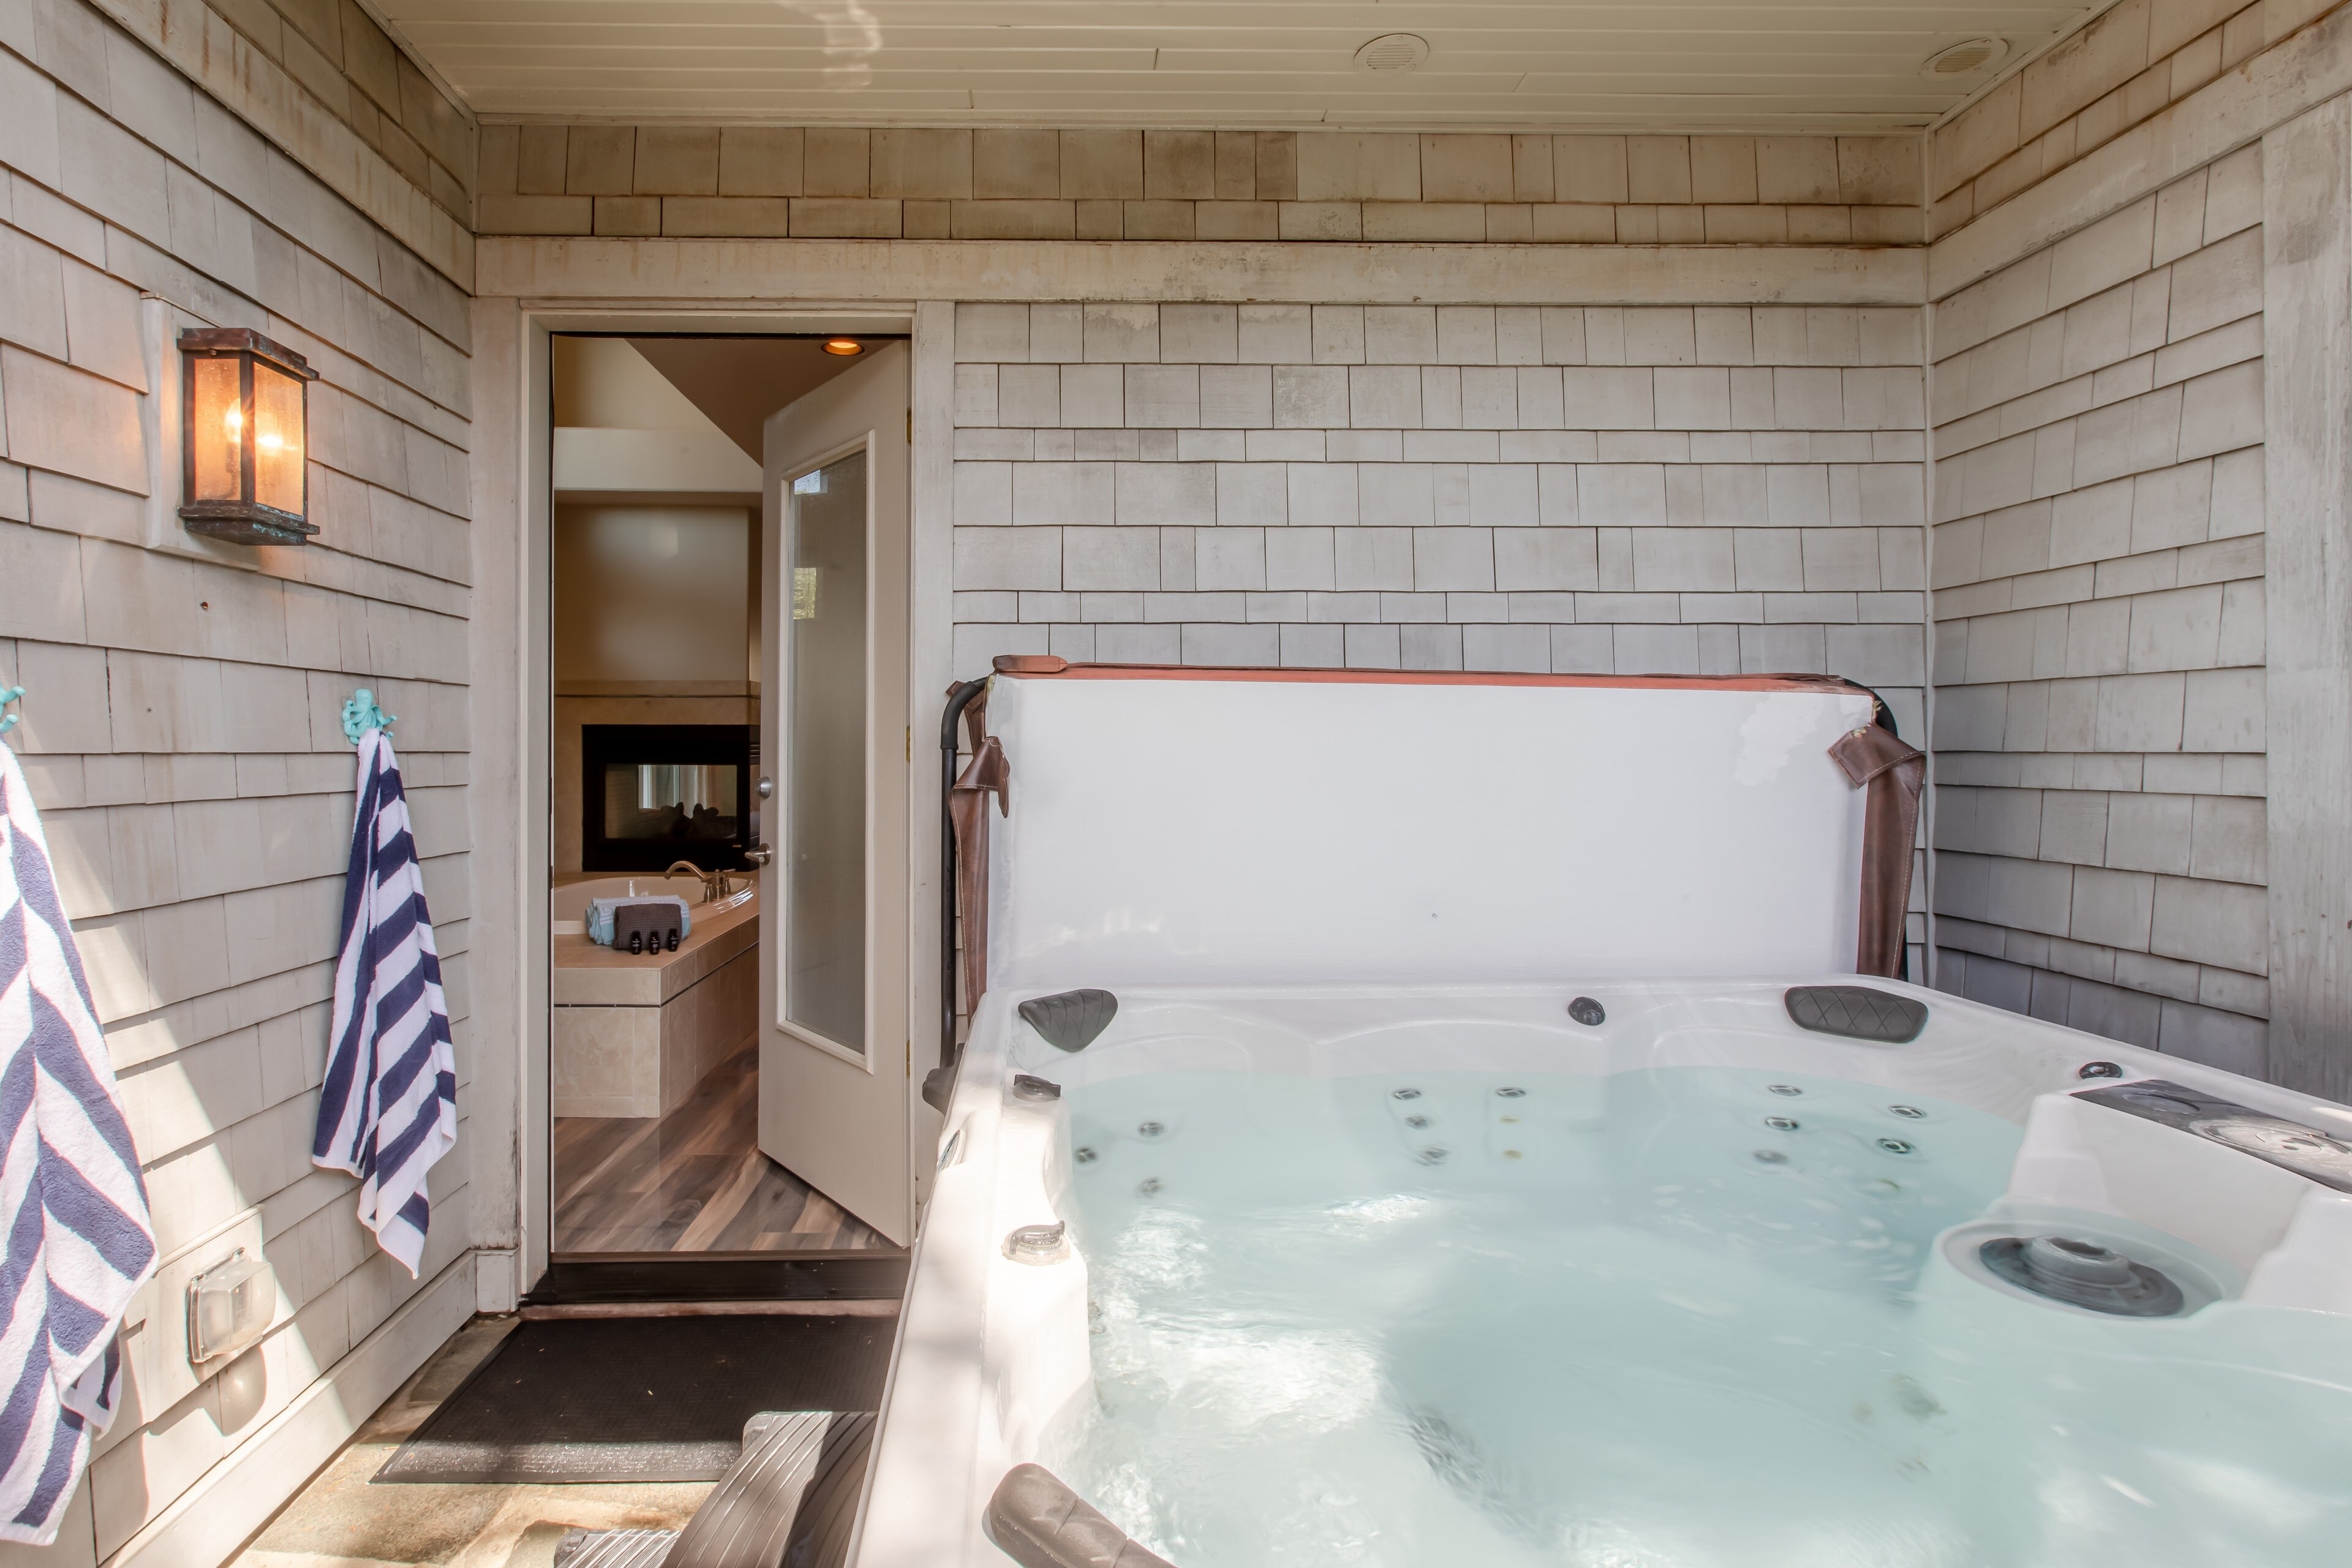 Villa Manzanita features a six-person, professionally-maintained hot tub — just what you need for ultimate relaxation.